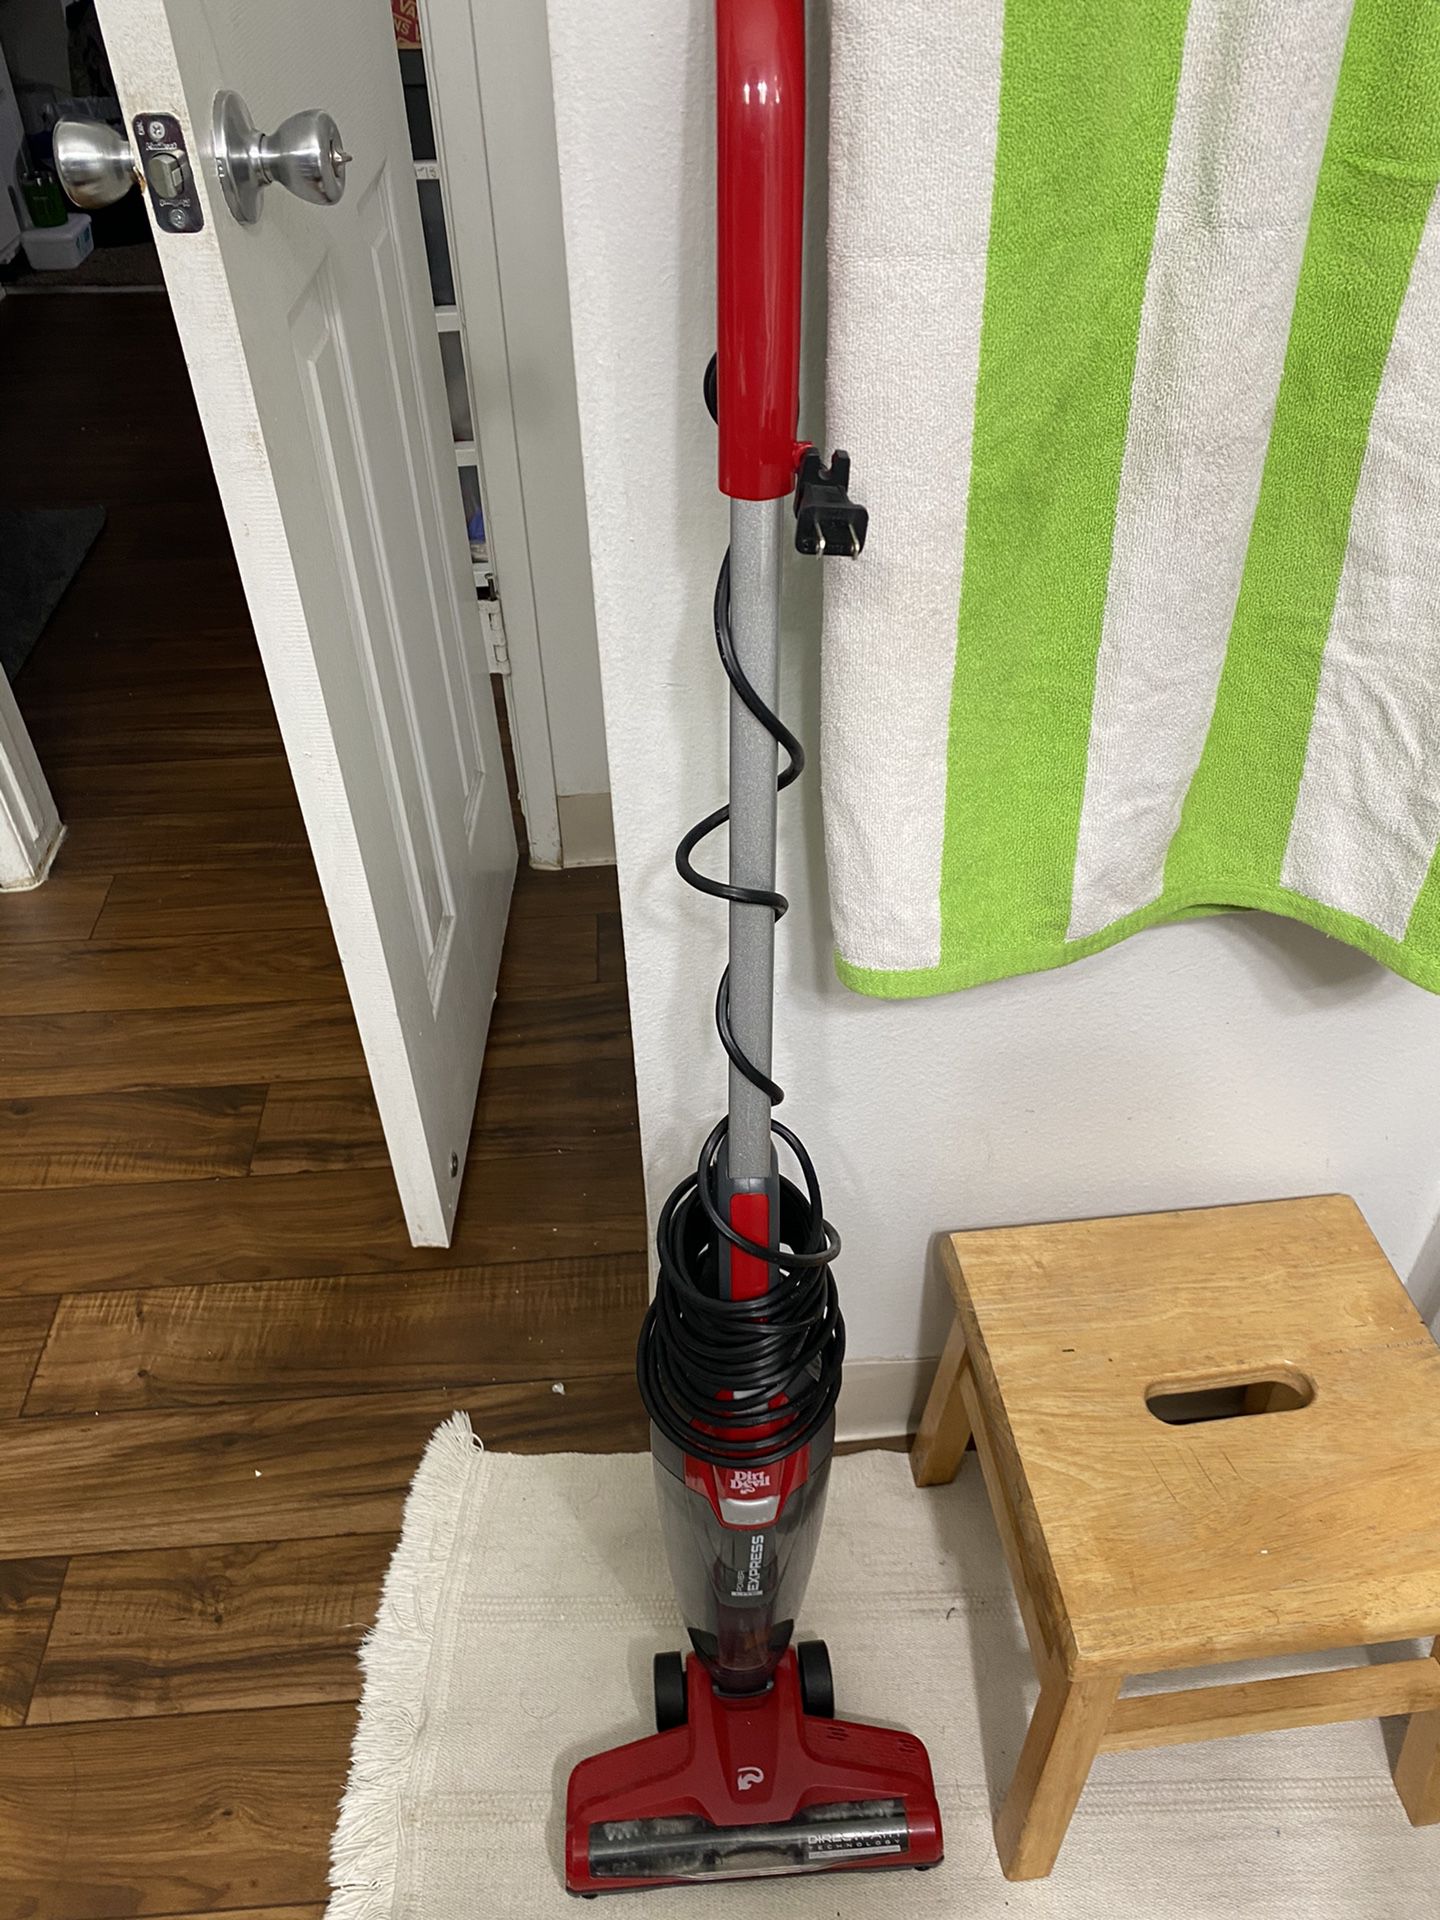 Dirt devil vacuum cleaner and Bar Height kitchen table